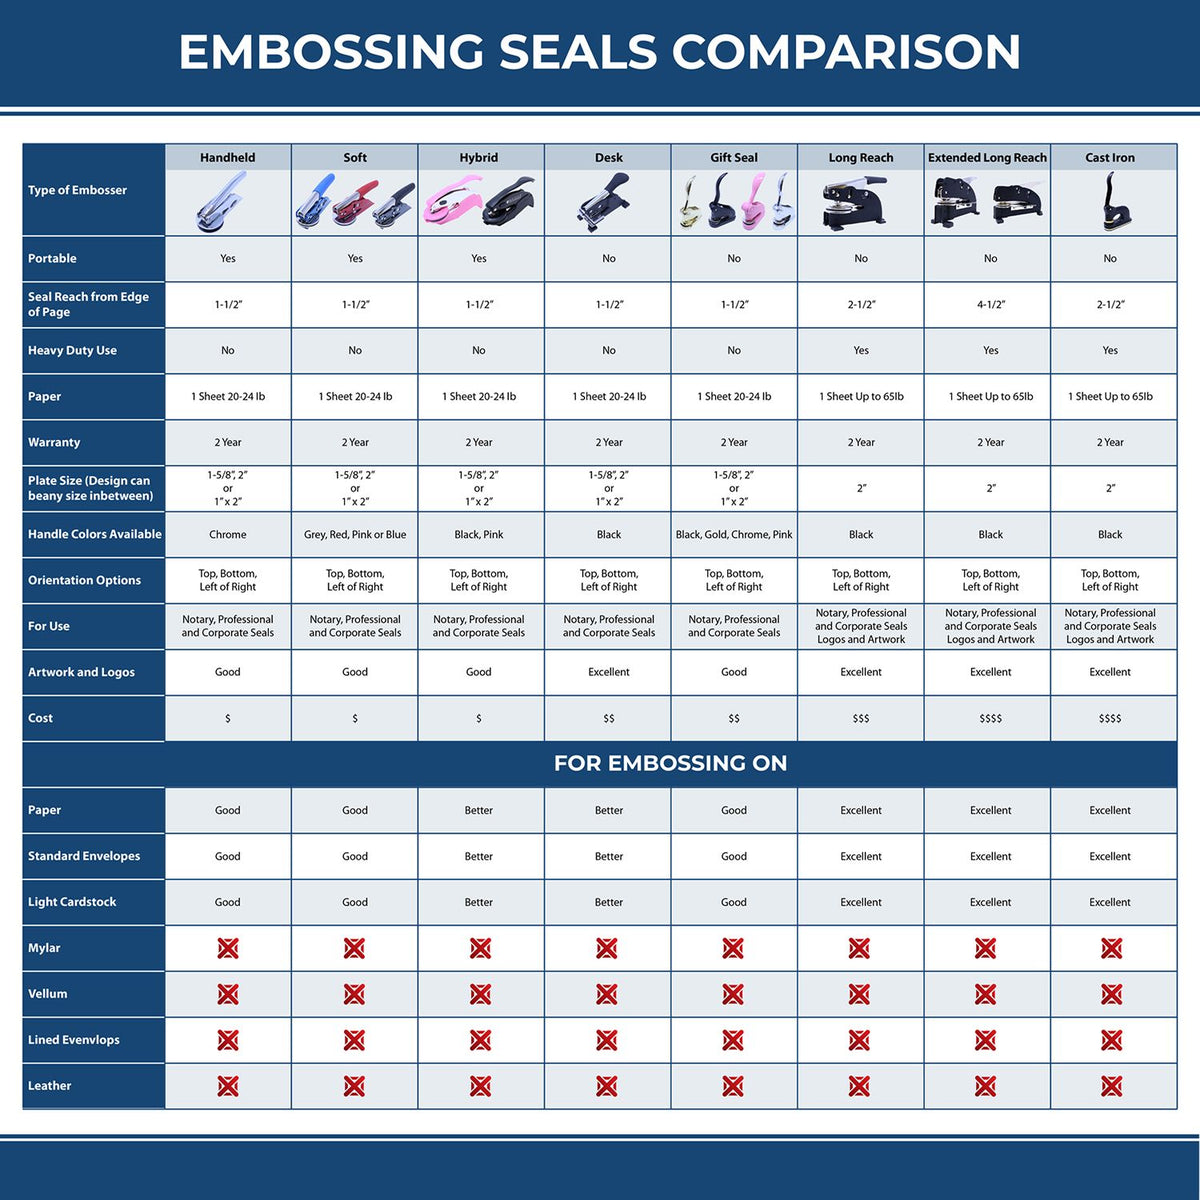 A comparison chart for the different types of mount models available for the State of Oklahoma Soft Land Surveyor Embossing Seal.